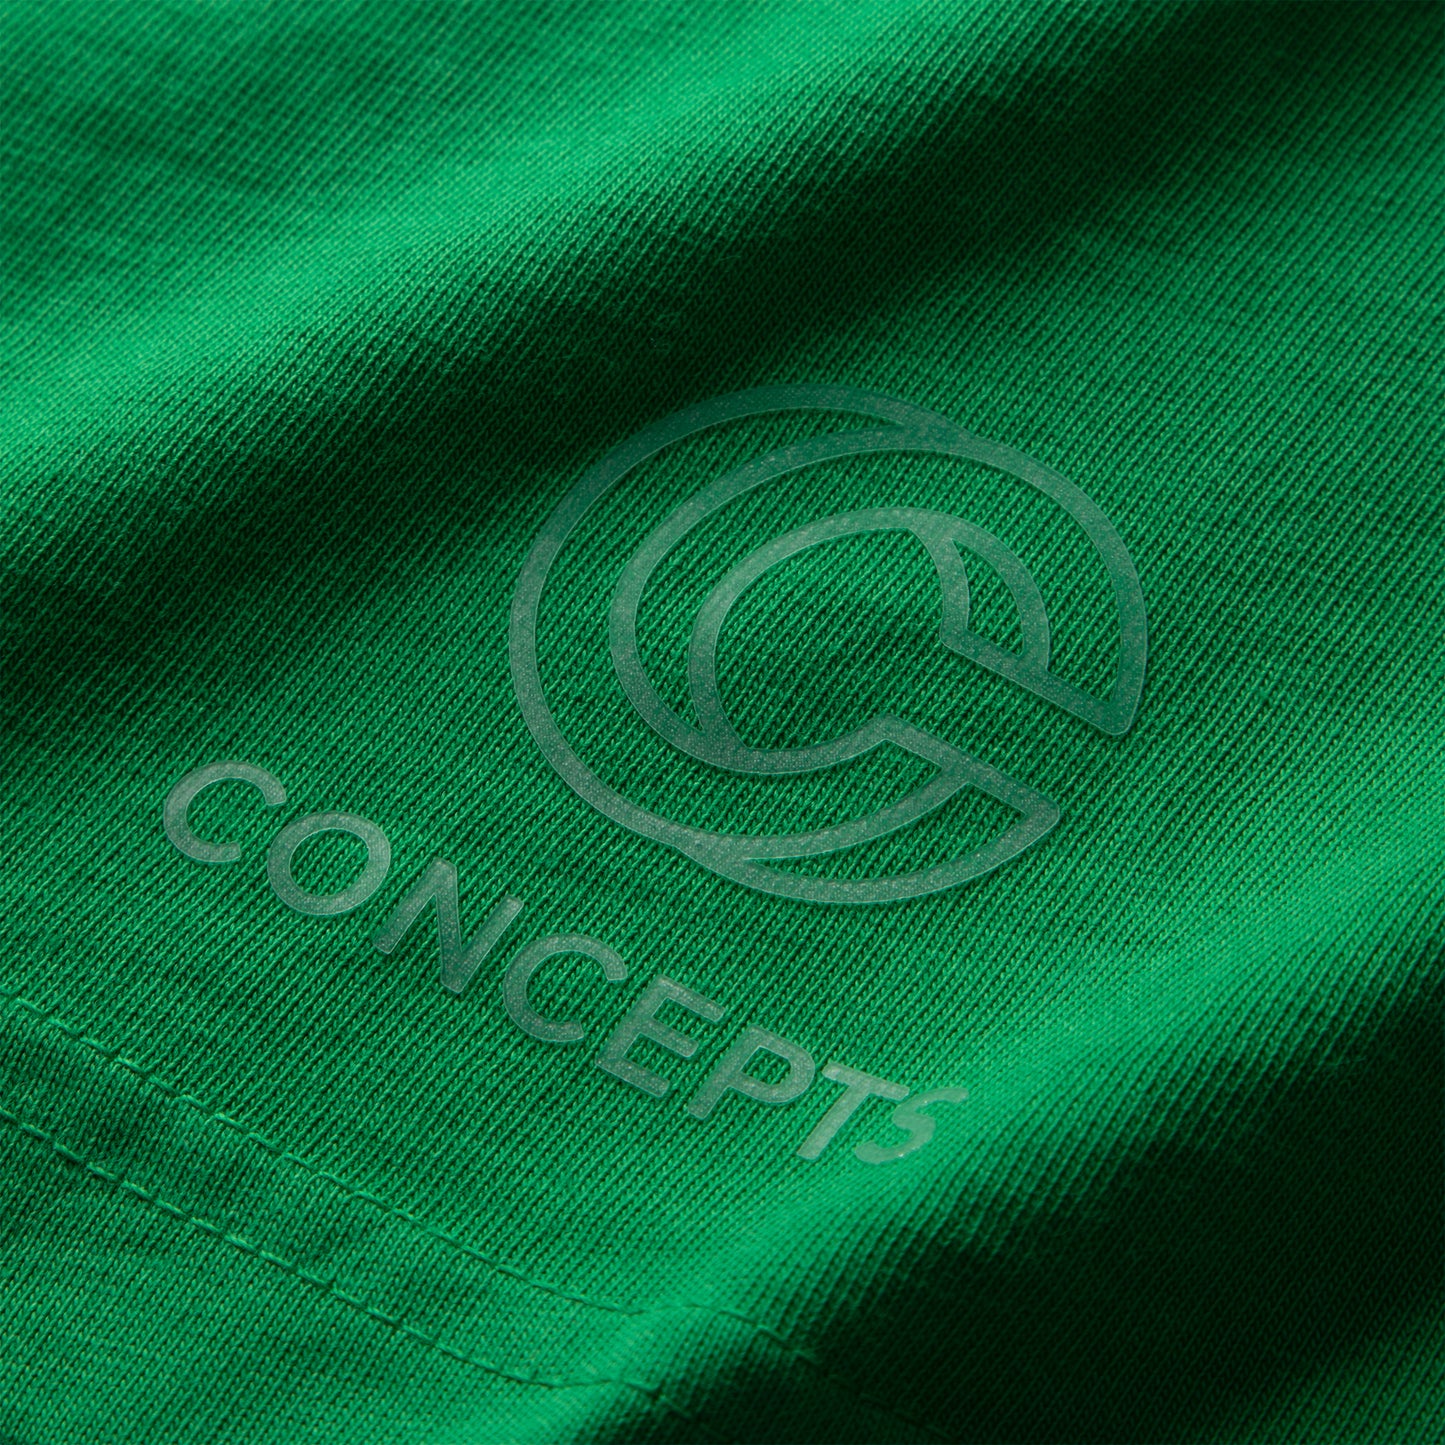 Concepts 3 Pack Tee (Sunlight/Green/Black)